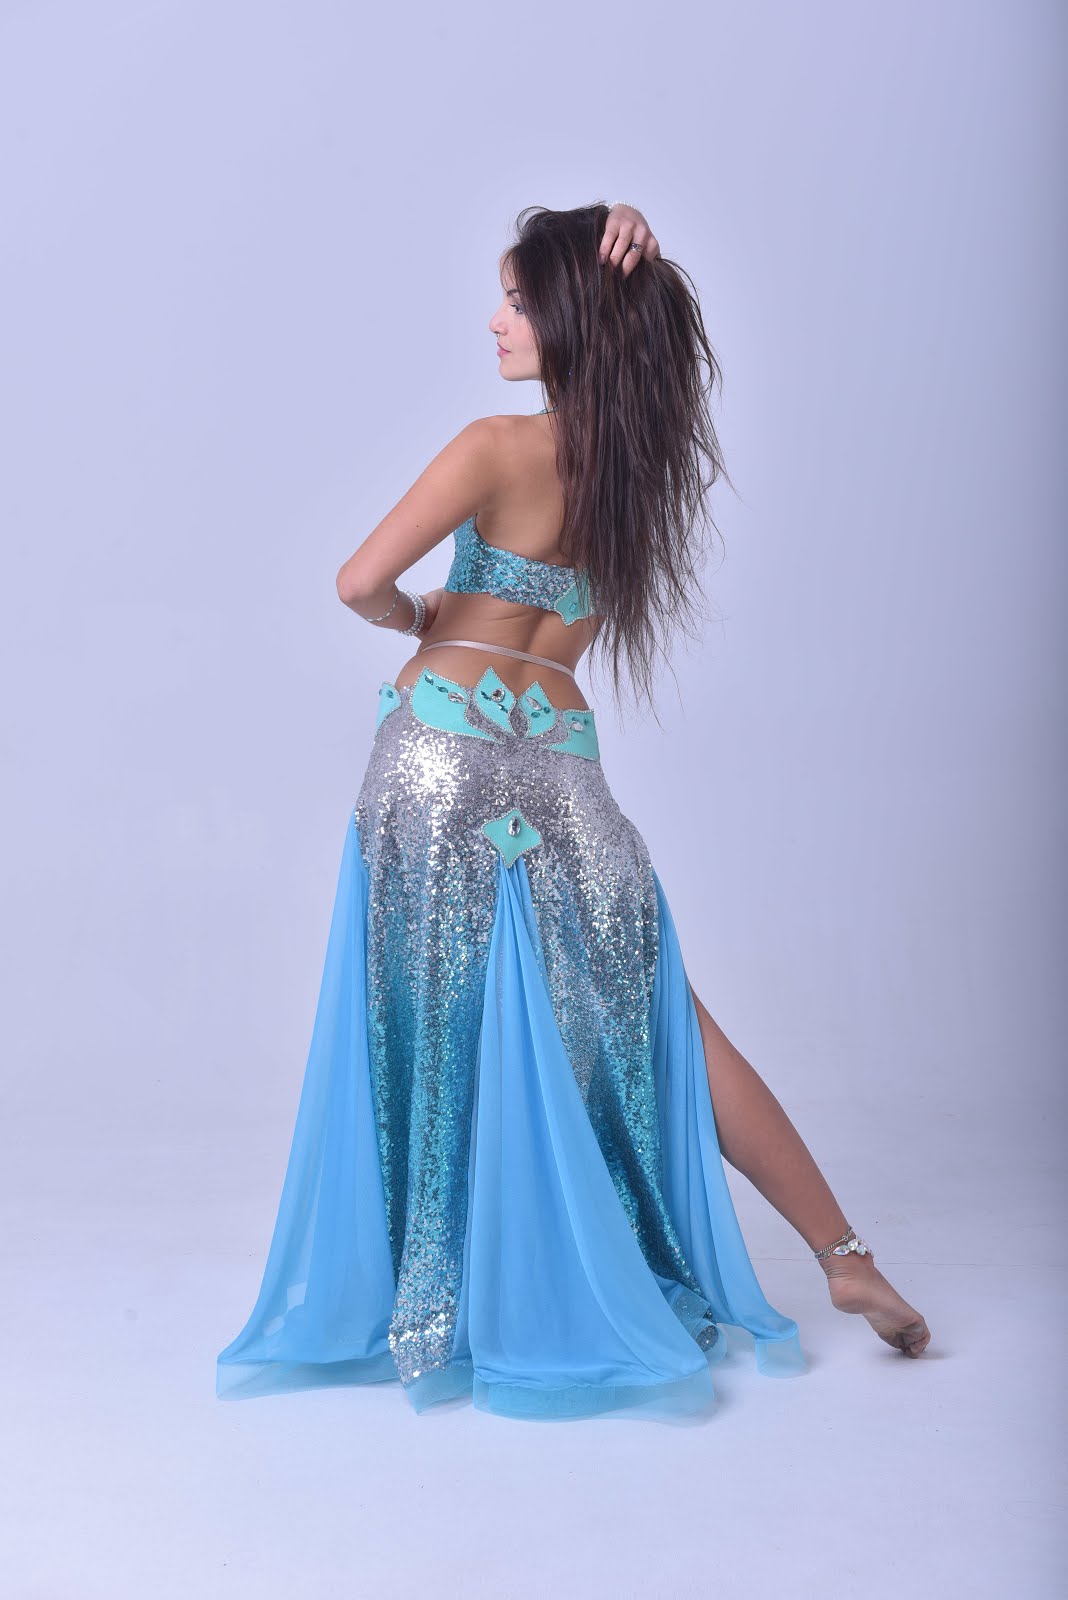 belly dancing lessons online